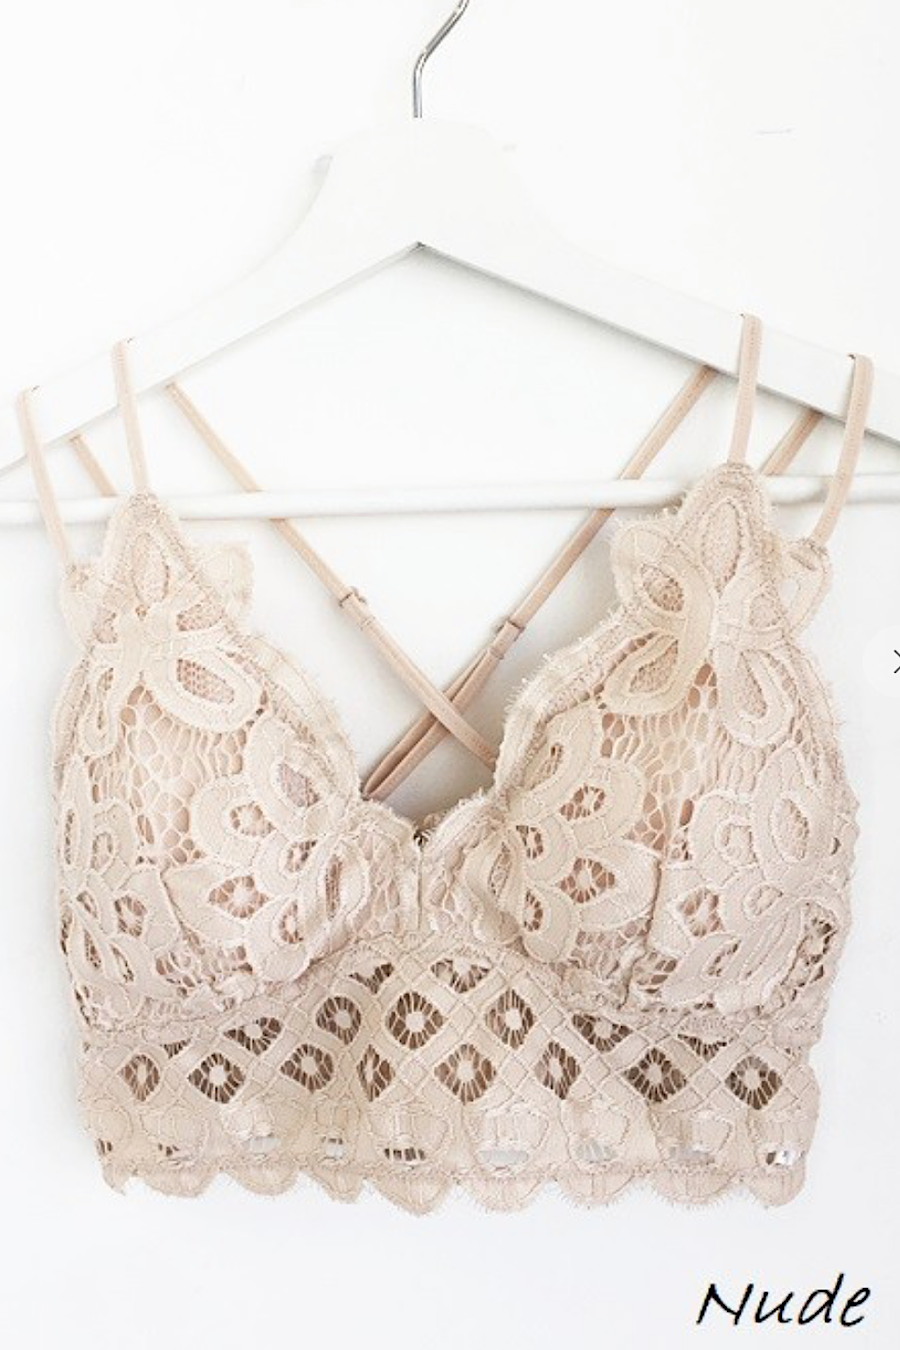 Lace Bralette with Adjustable Straps